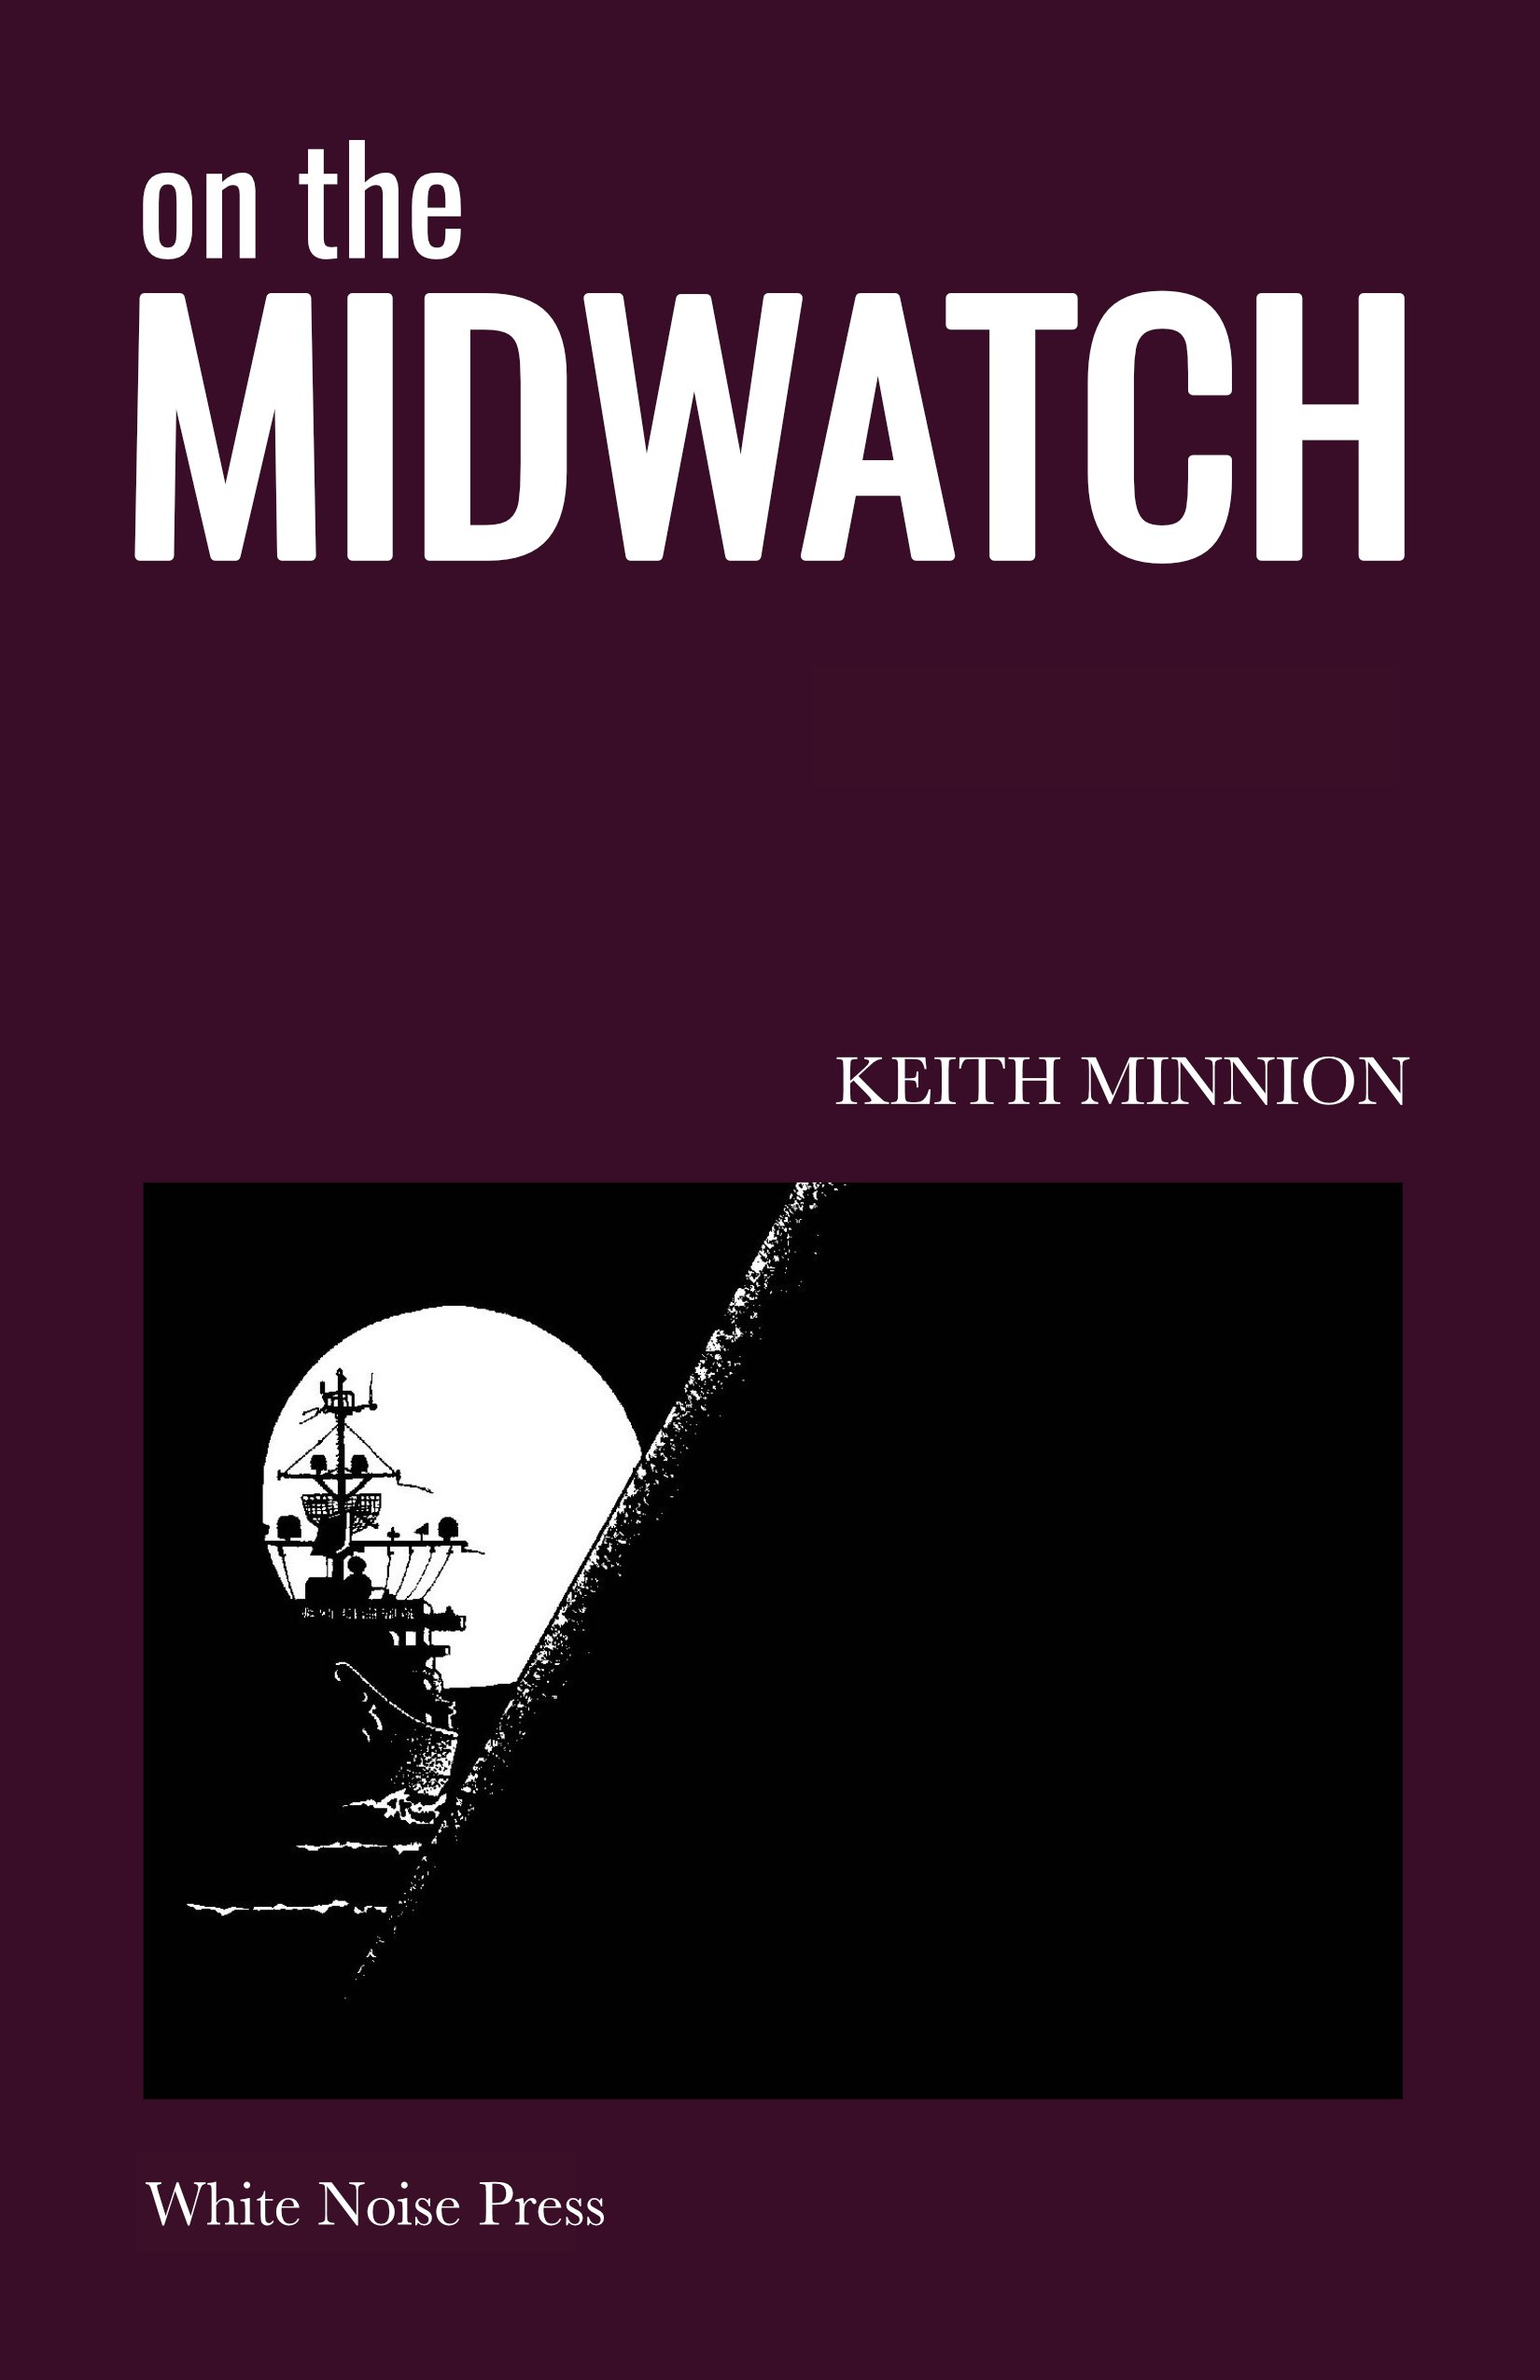 On The Midwatch – a short story